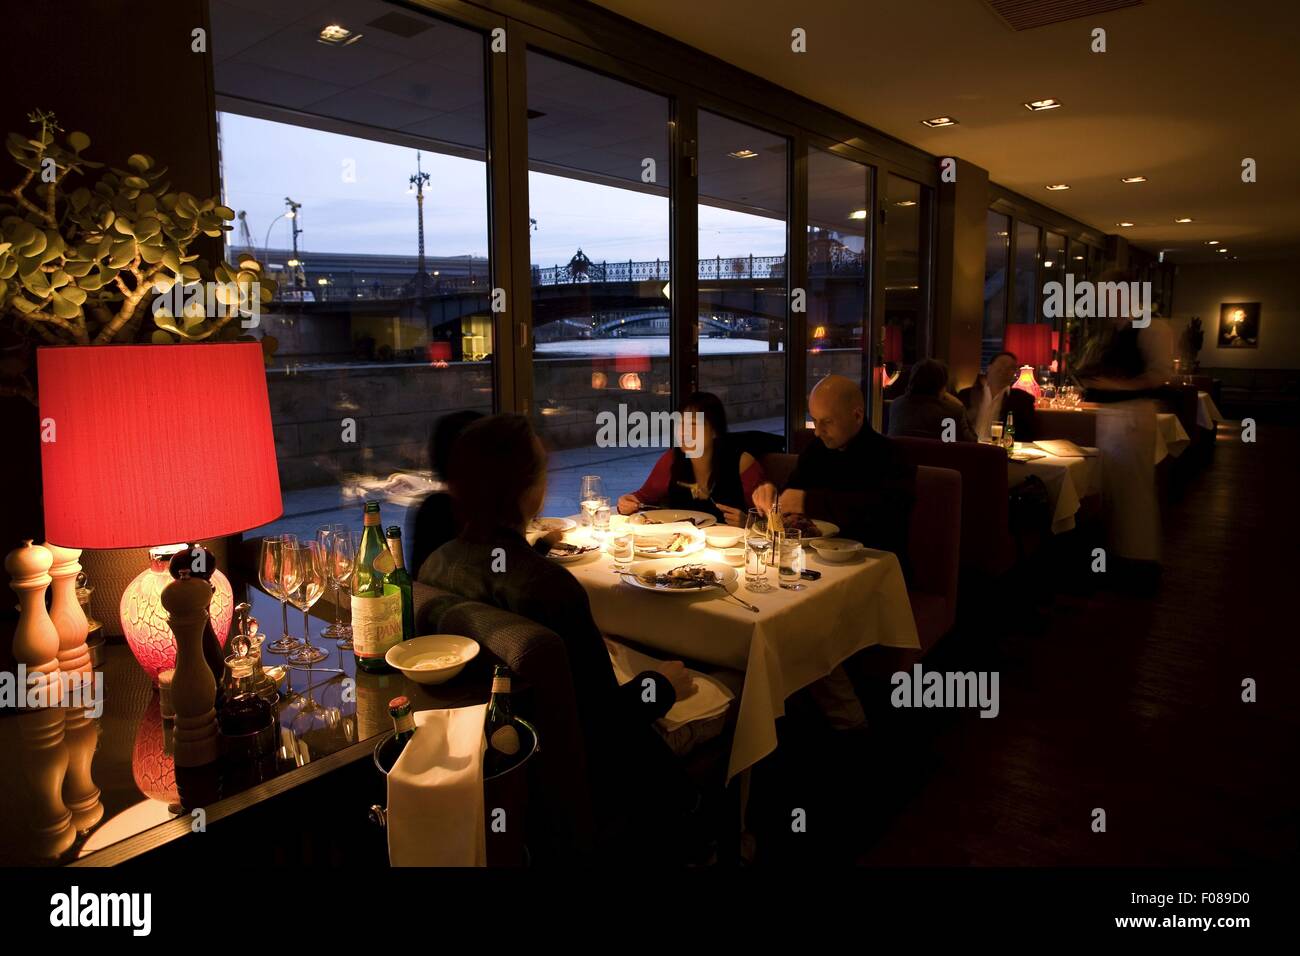 People dinning at Grill Royal restaurant, Berlin, Germany Stock Photo -  Alamy